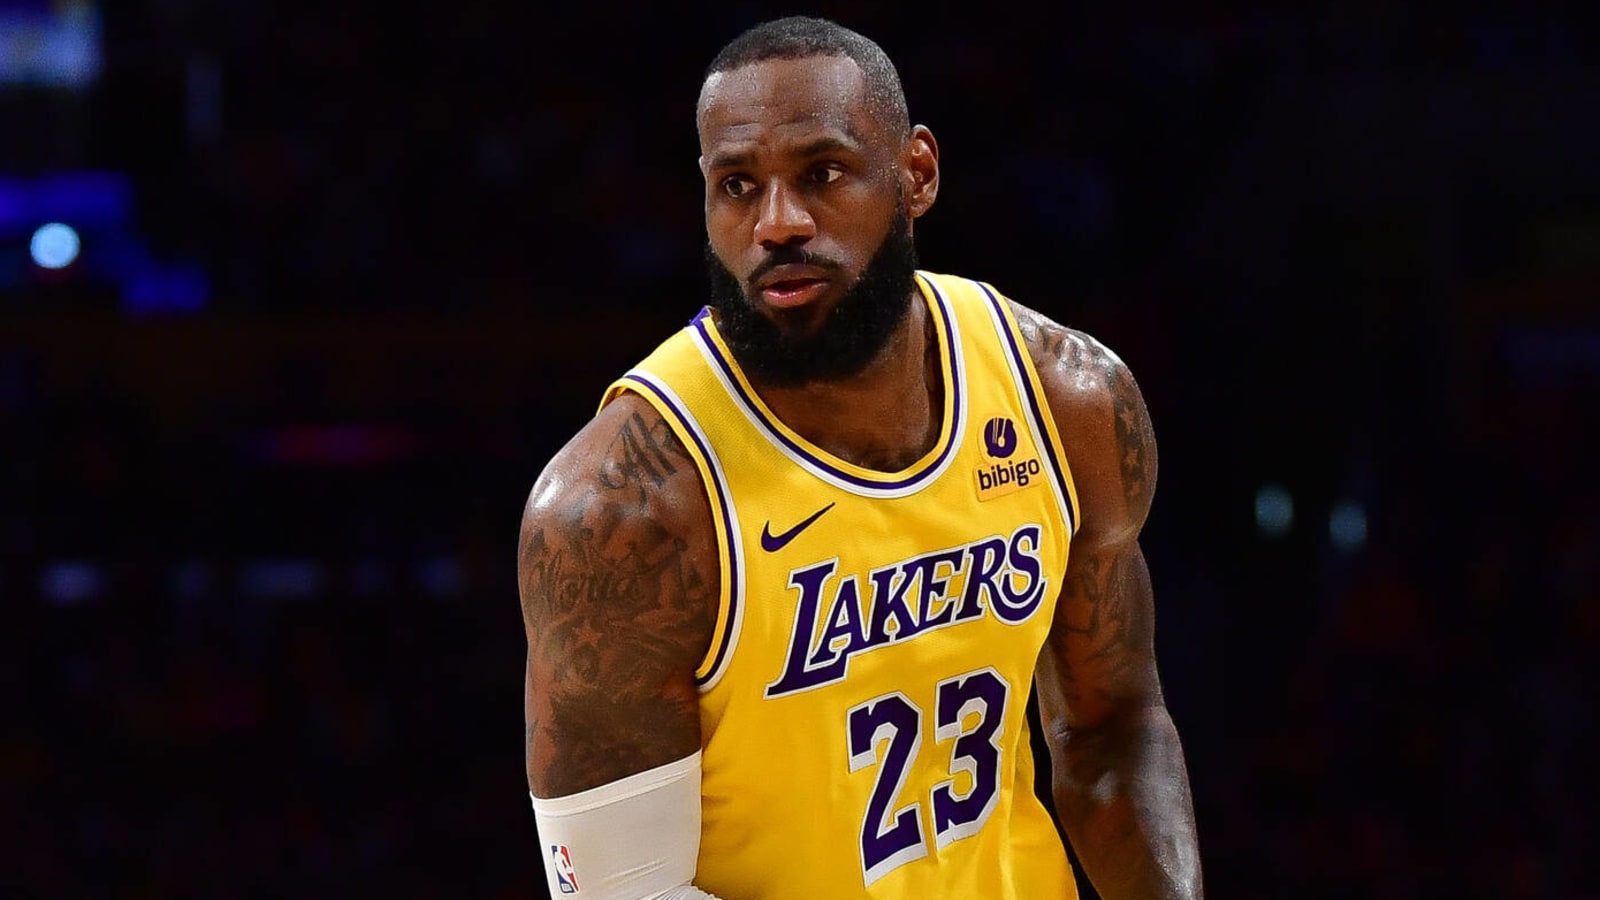 LeBron James: 'We're supposed to have anxiety'